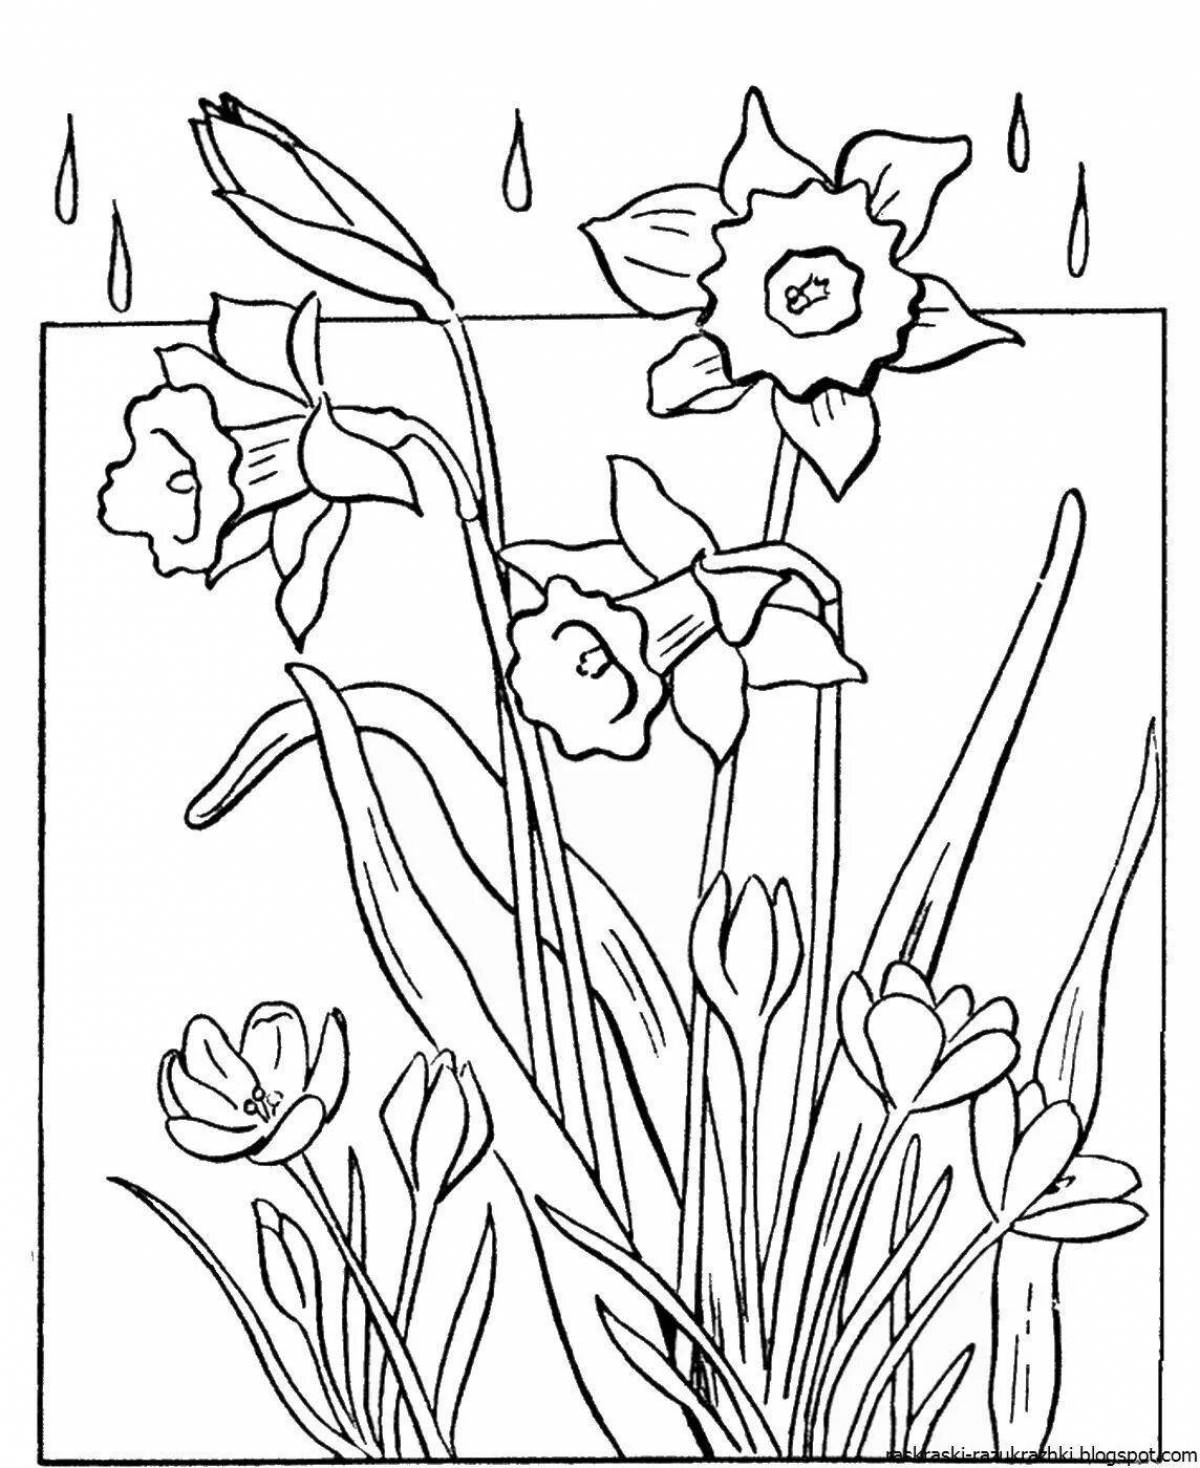 Coloring bright spring flowers